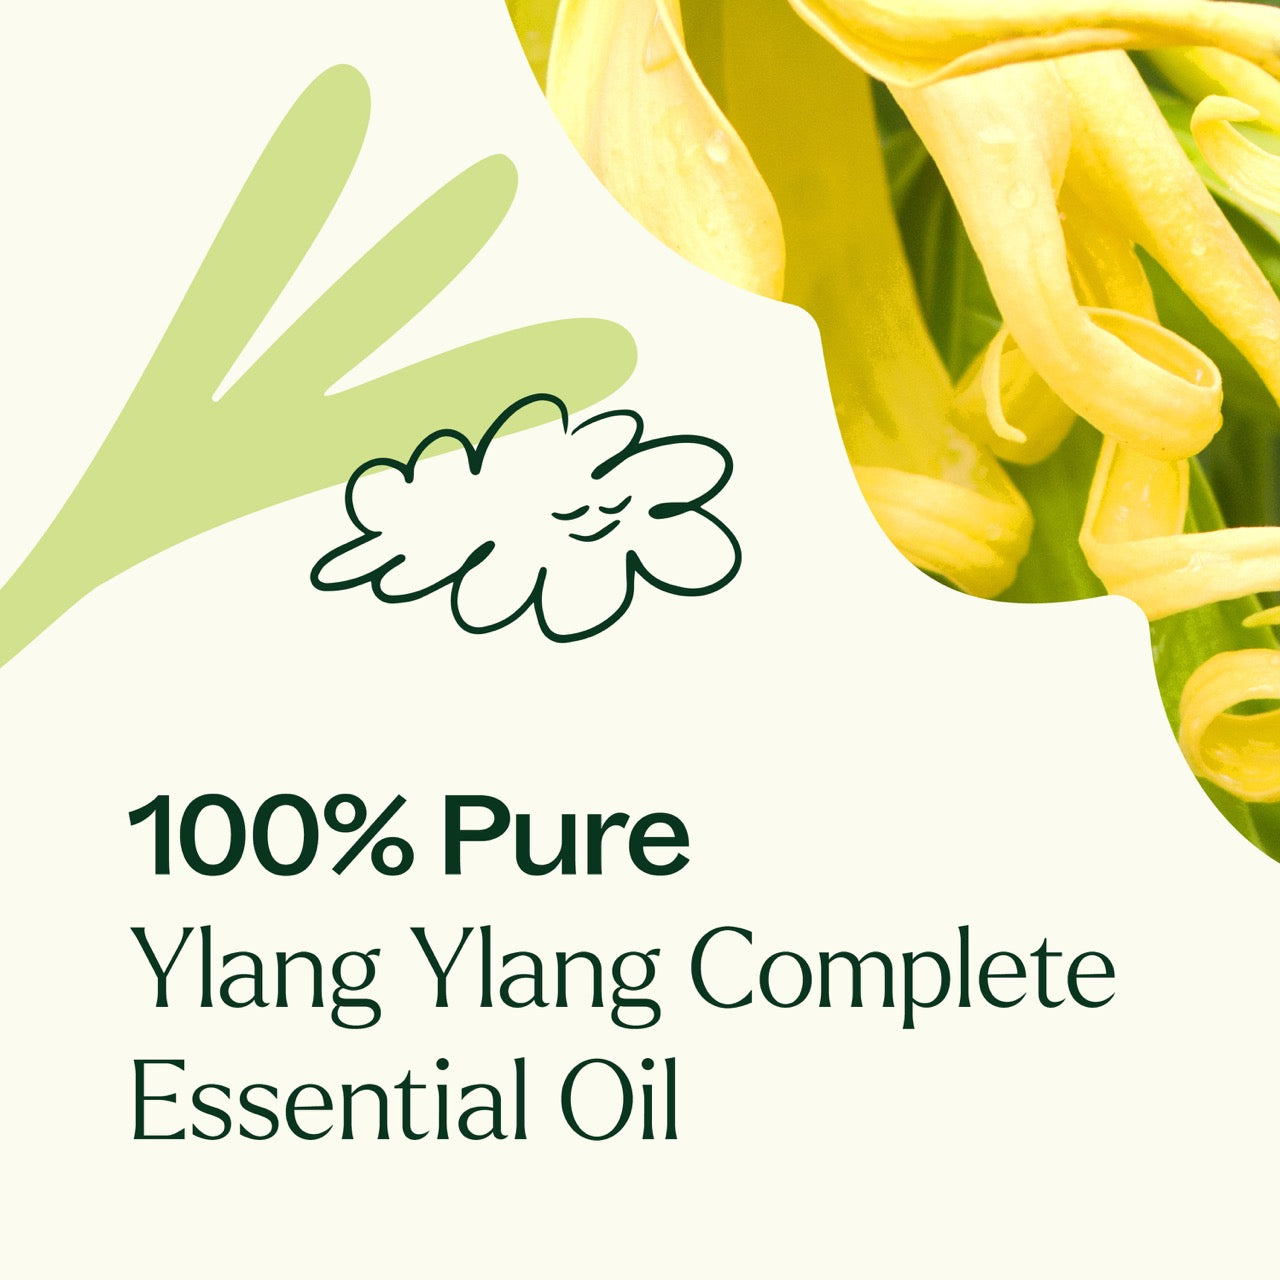 100% pure Ylang Ylang Complete Essential Oil